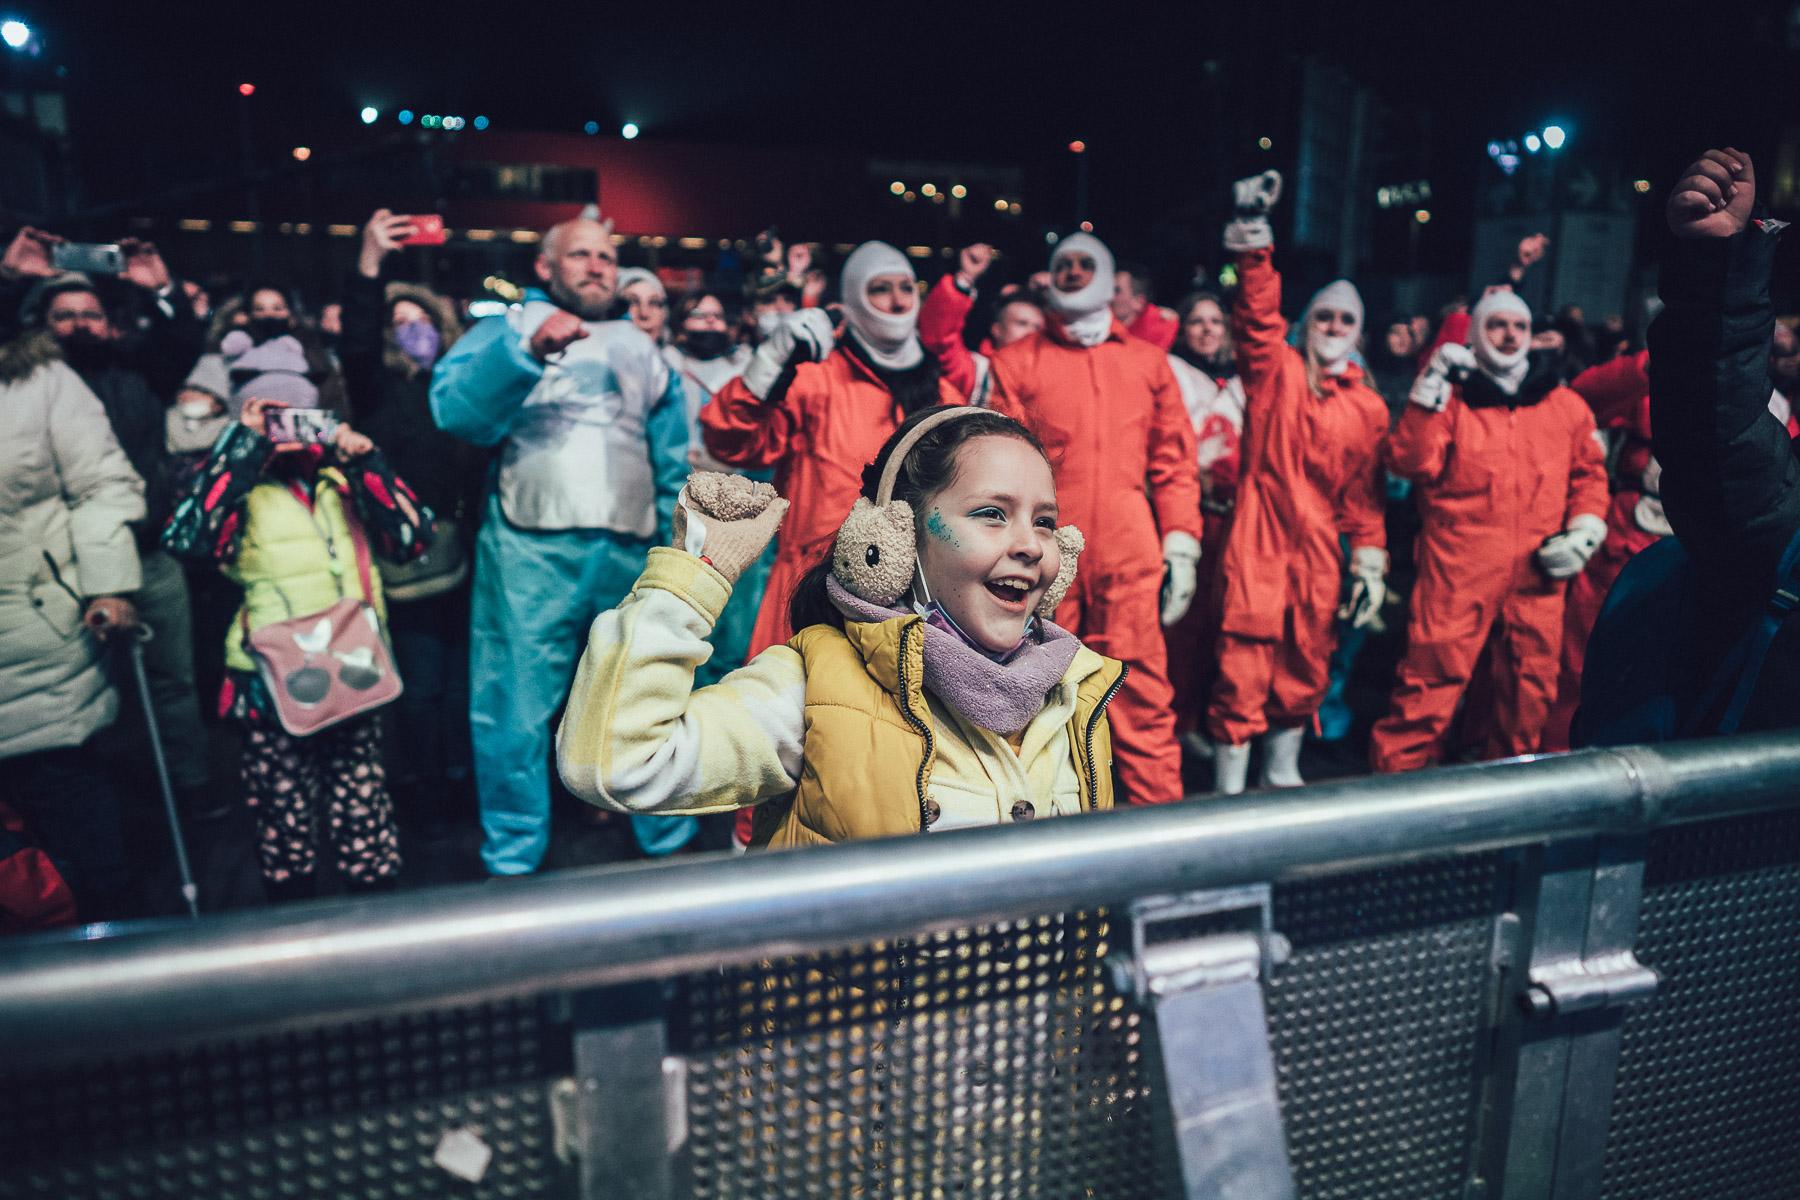 Audience members cheering in front of the stage at the opening ceremony of the European Capital of Culture Esch2022